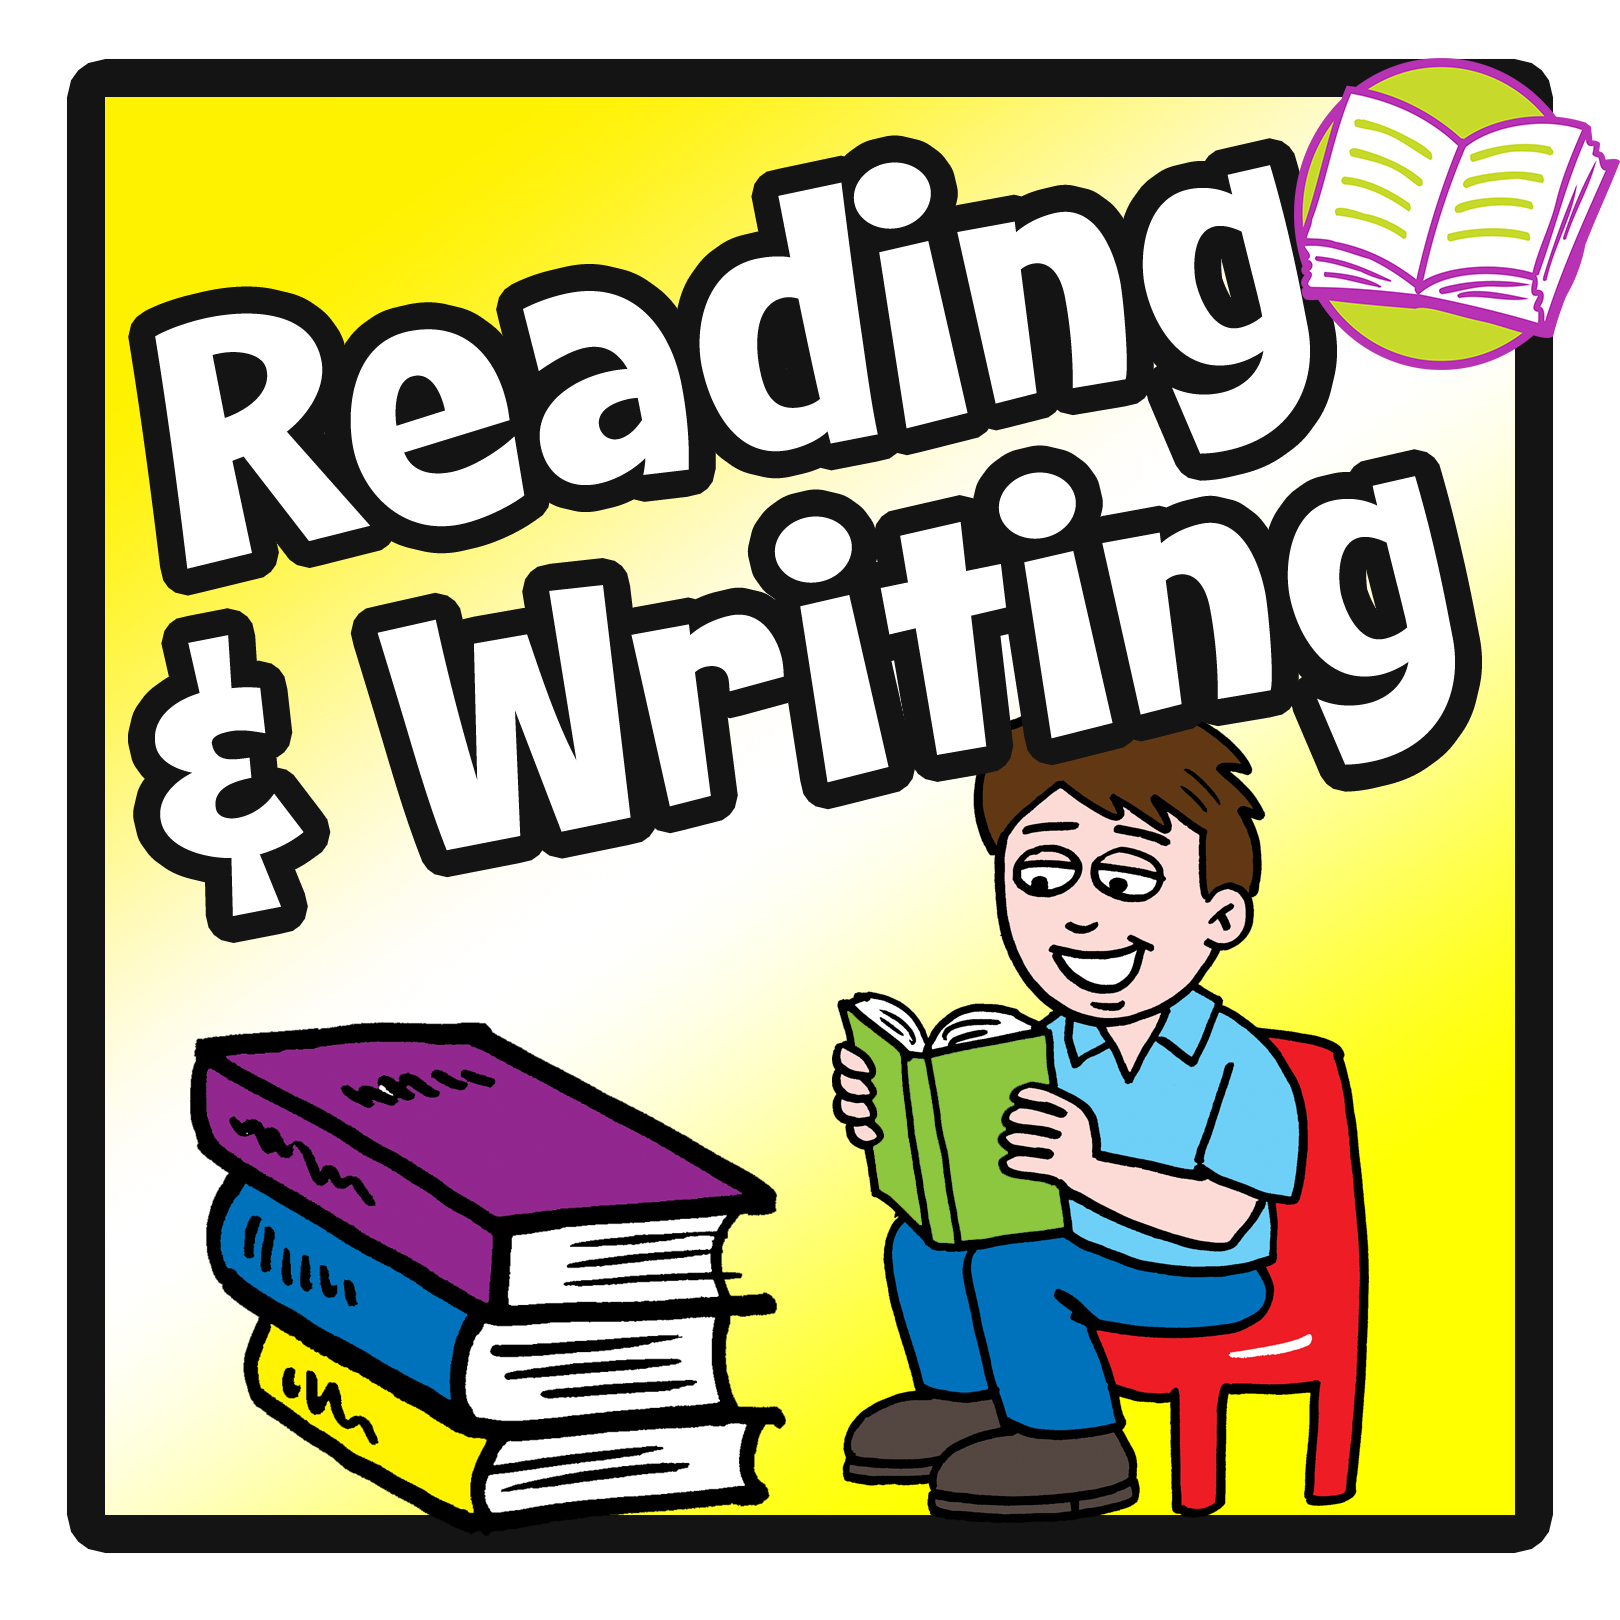 printable-reading-and-writing-resources-k-3-teacher-resources